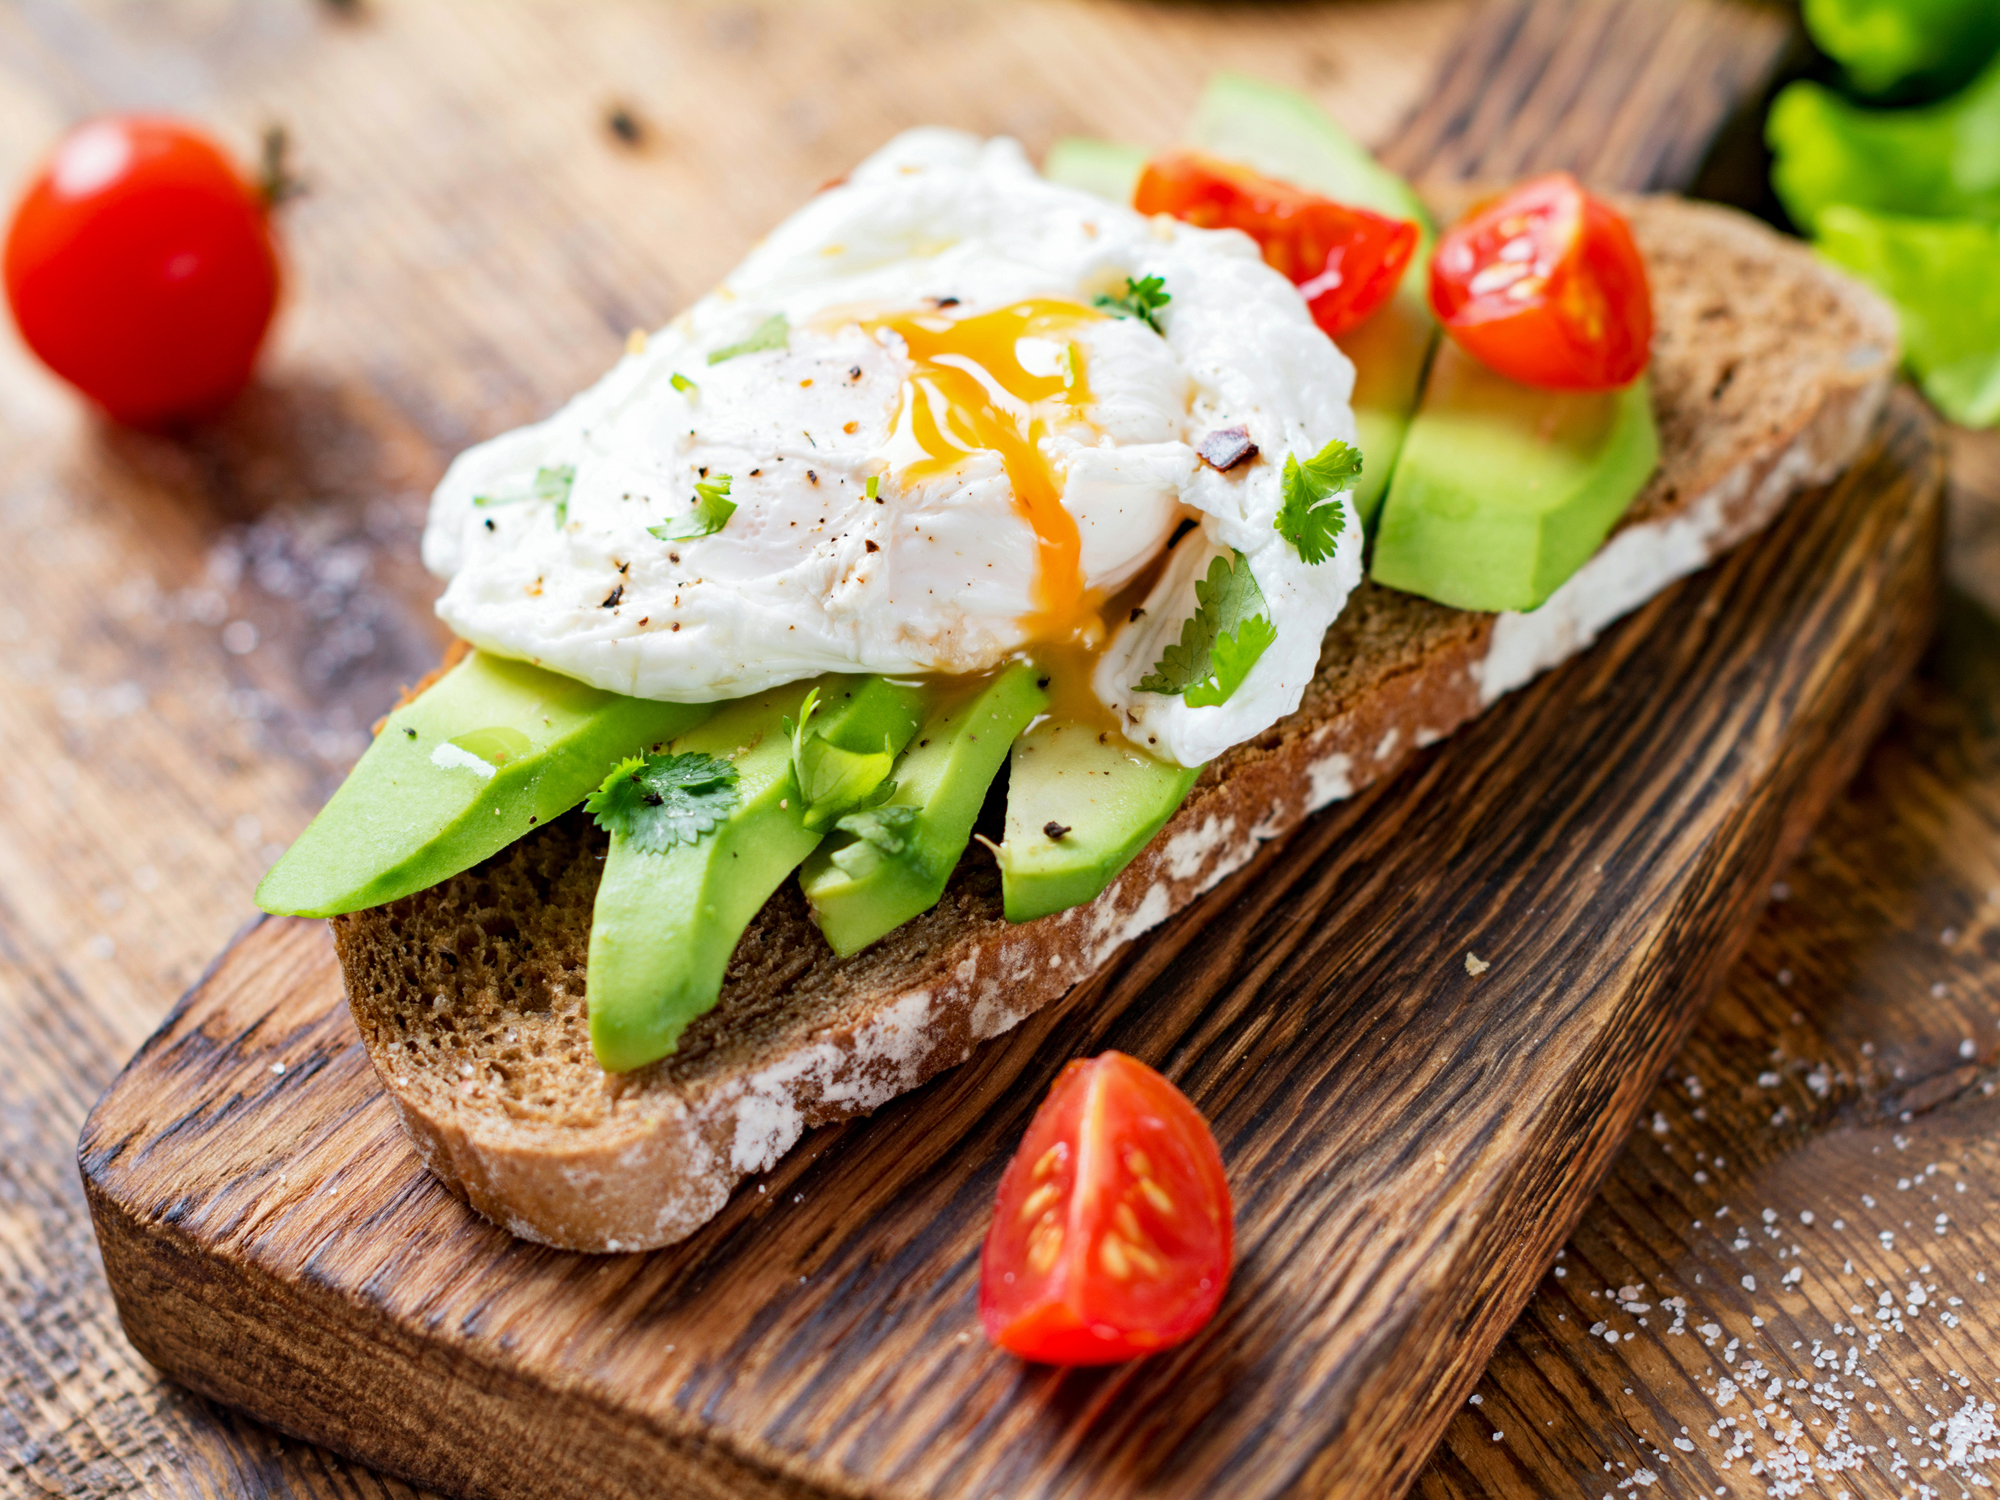 In the kitchen with Kelley: Avocado toast and eggs over-easy